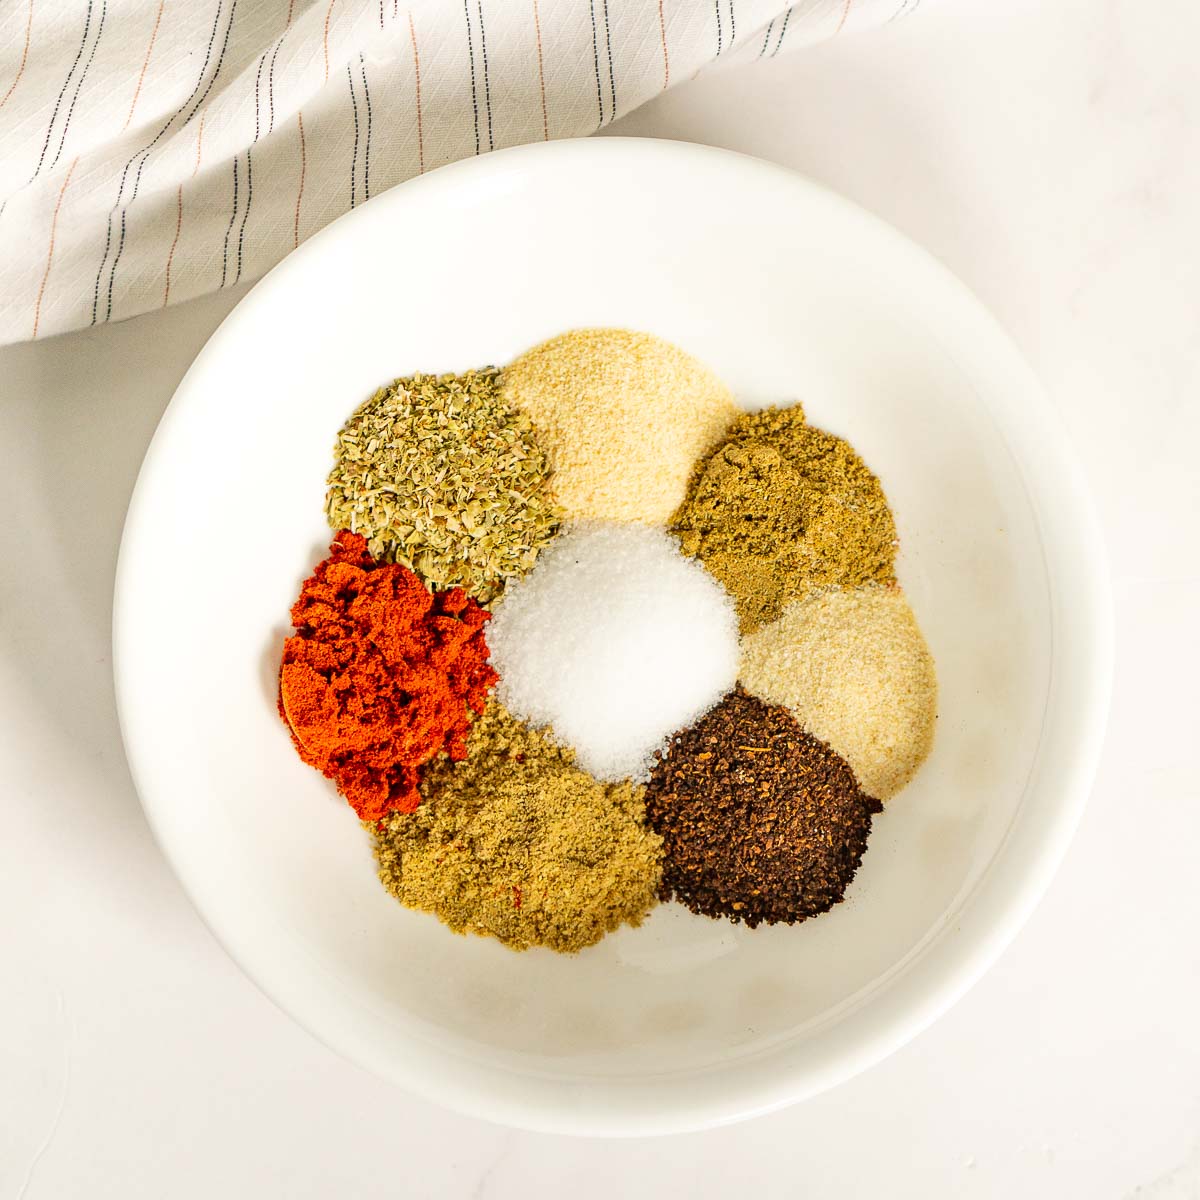 Ingredients for taco seasoning on a plate